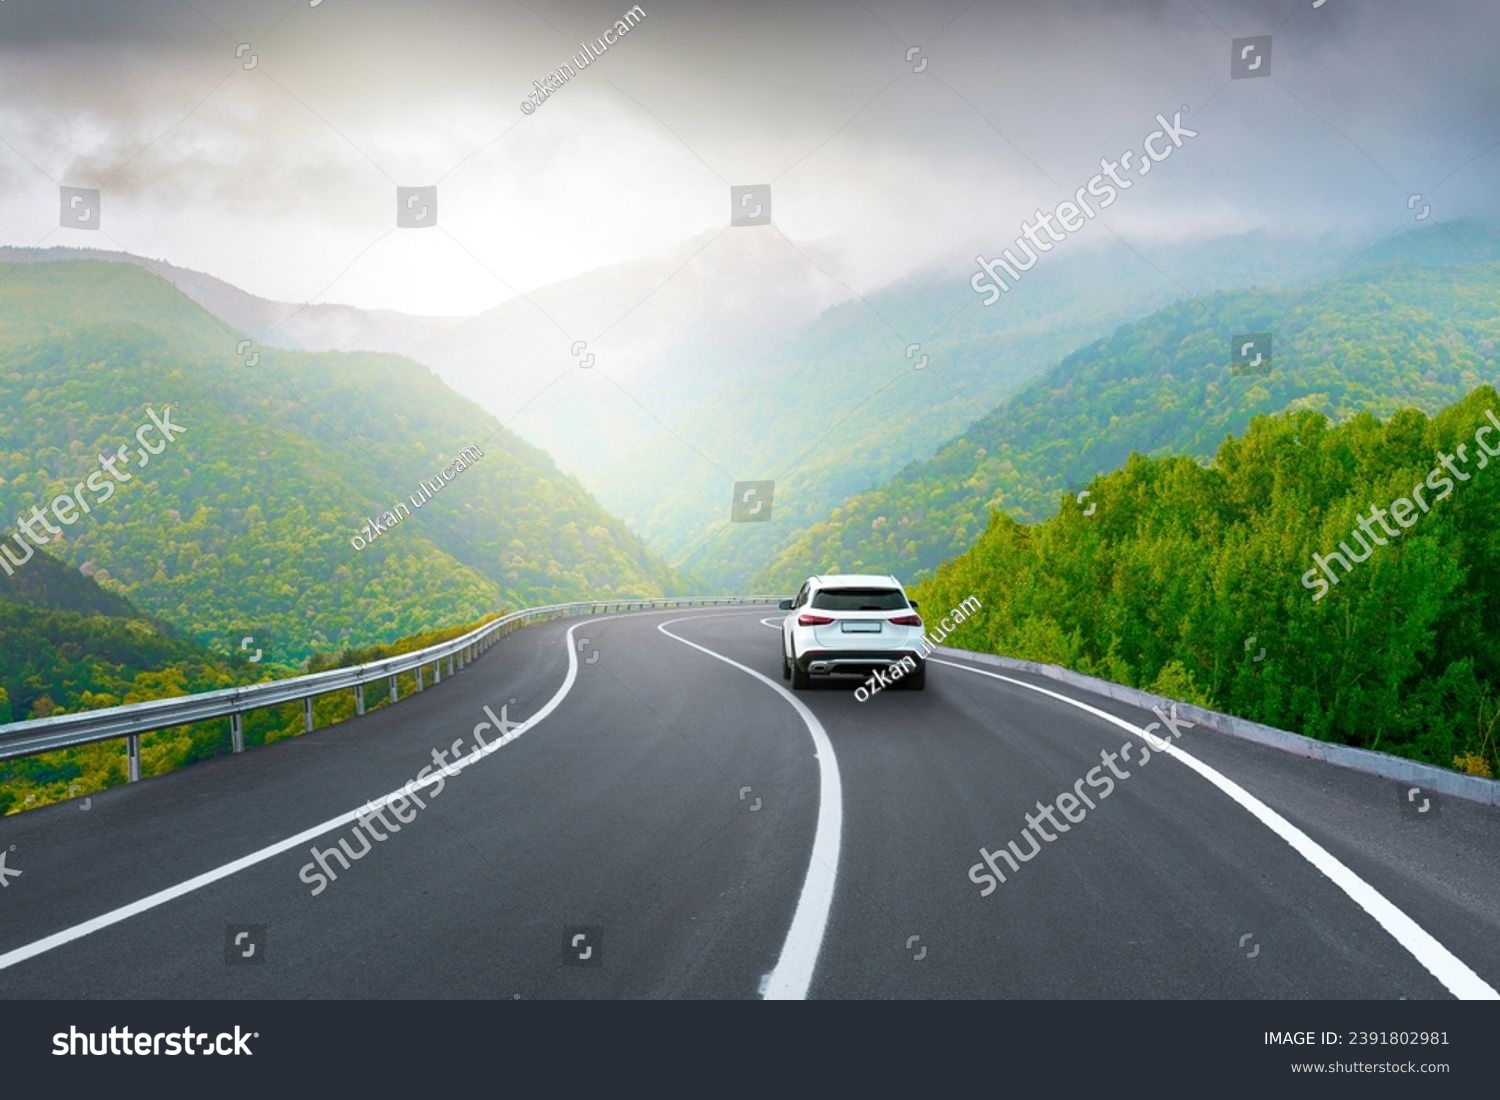 white car drive on mountain road landscape in winter. Nature scenery on highway in green mountains. Winter travel on black asphalt road. Car driving in the beautiful nature of Europe. Bavaria, Germany #2391802981